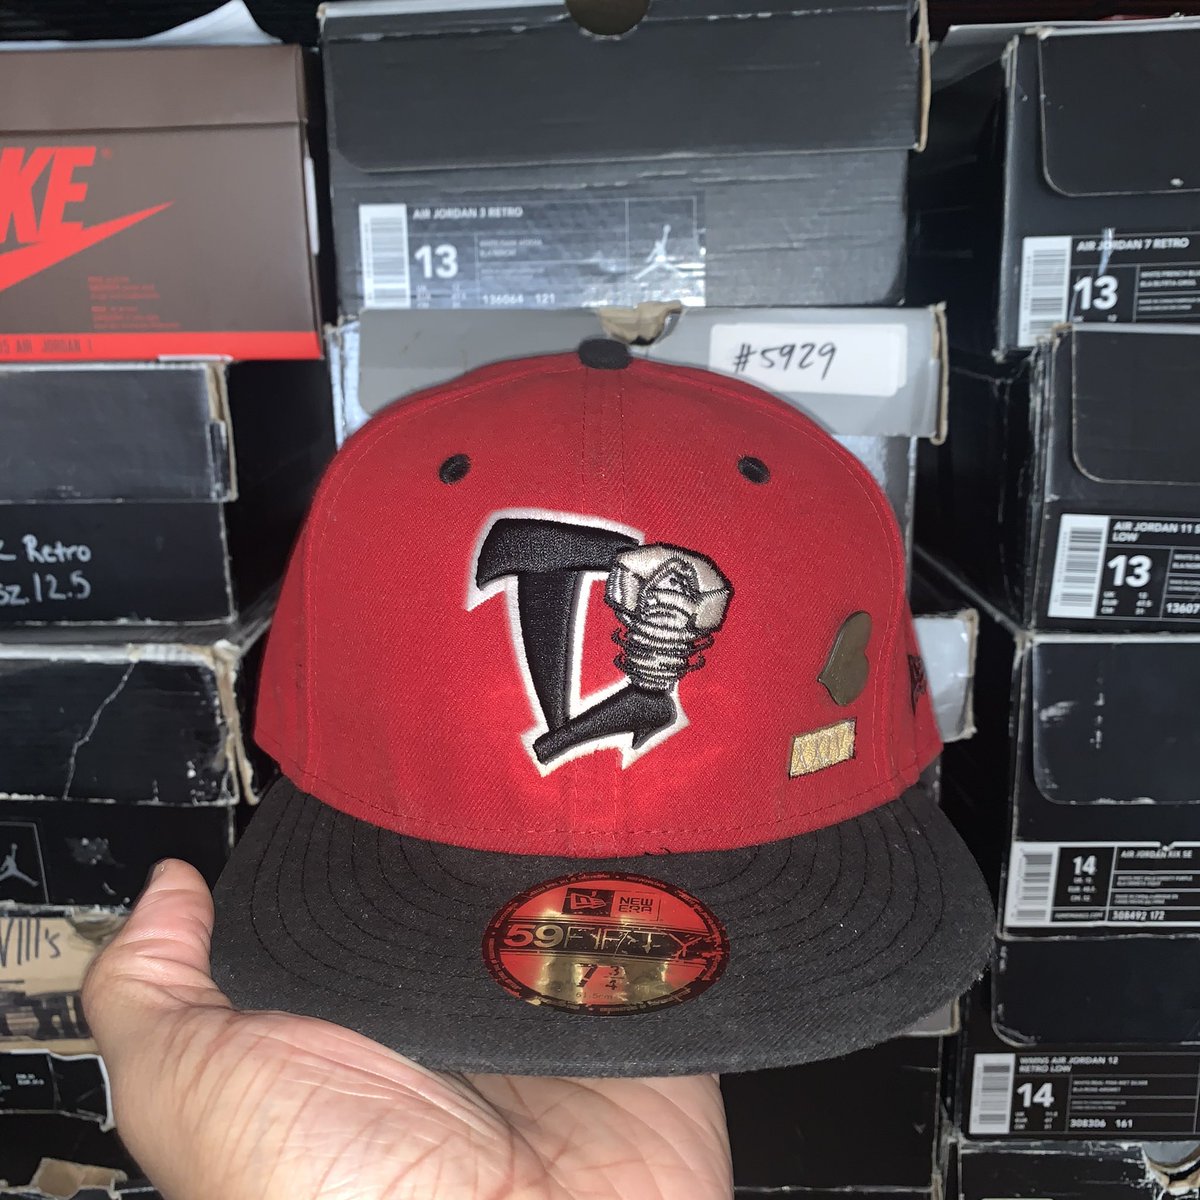 And last but not least, the  @HeartOfXXiV x  @LansingLugnuts collaboration, profits went to local city school programs, my absolute favorite Lugnuts fitteds of them all. Good people. Good cause. Great hat